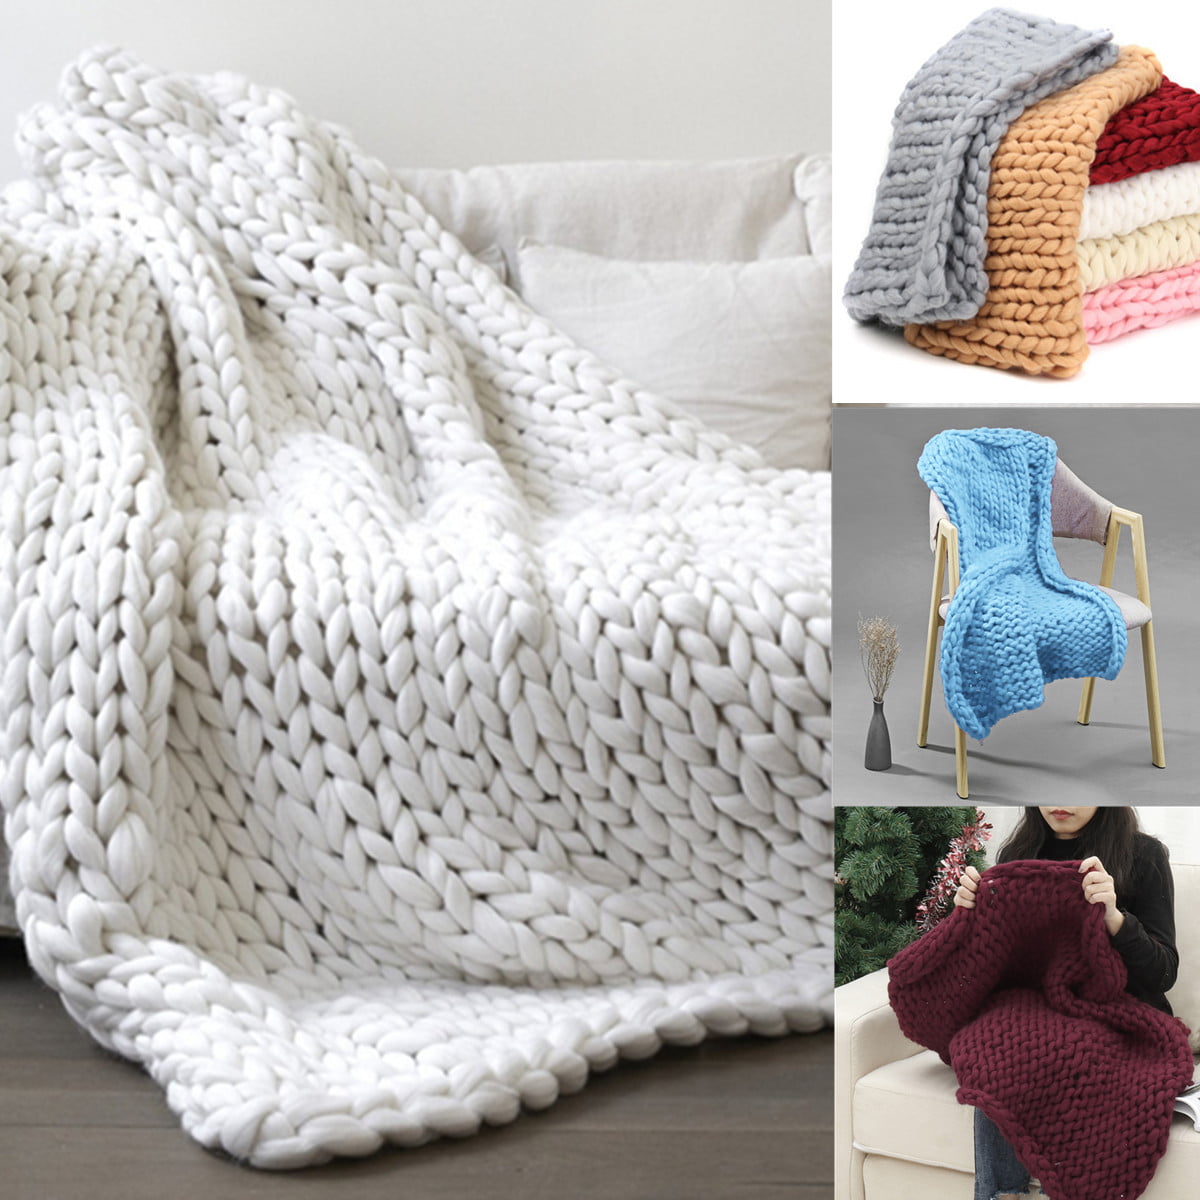 Chunky Blanket Walmart on Sale, UP TO 59% OFF | www.aramanatural.es